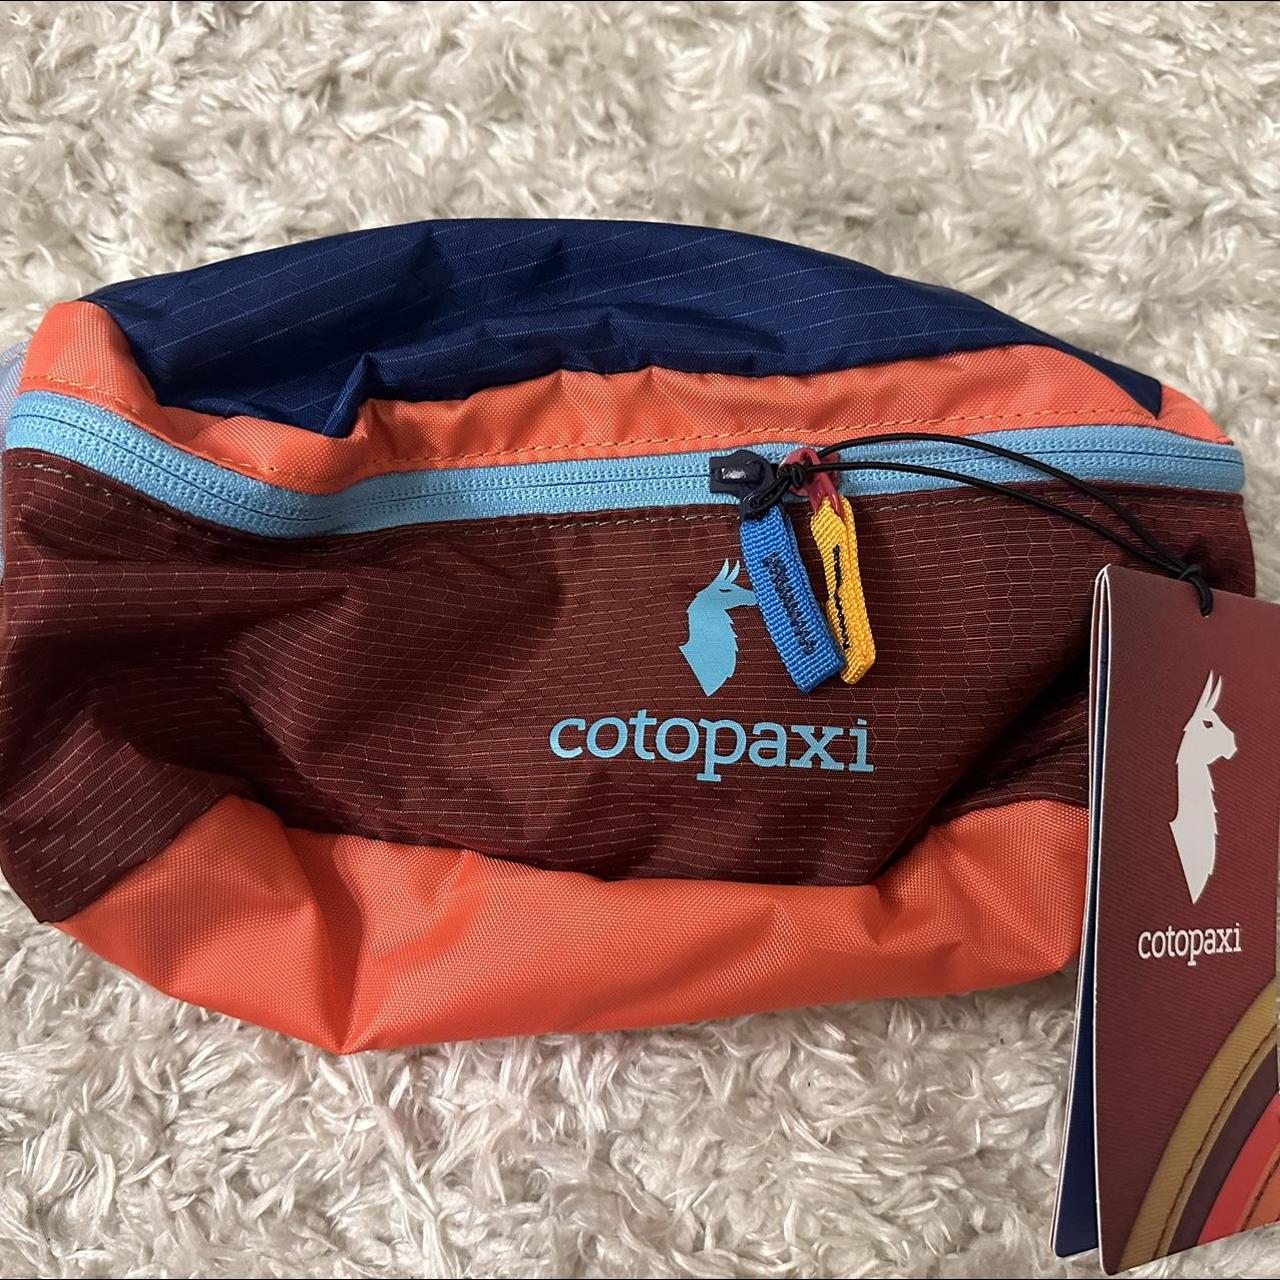 cotopaxi fanny pack OFFERS ACCEPTED!!! will go lower... - Depop